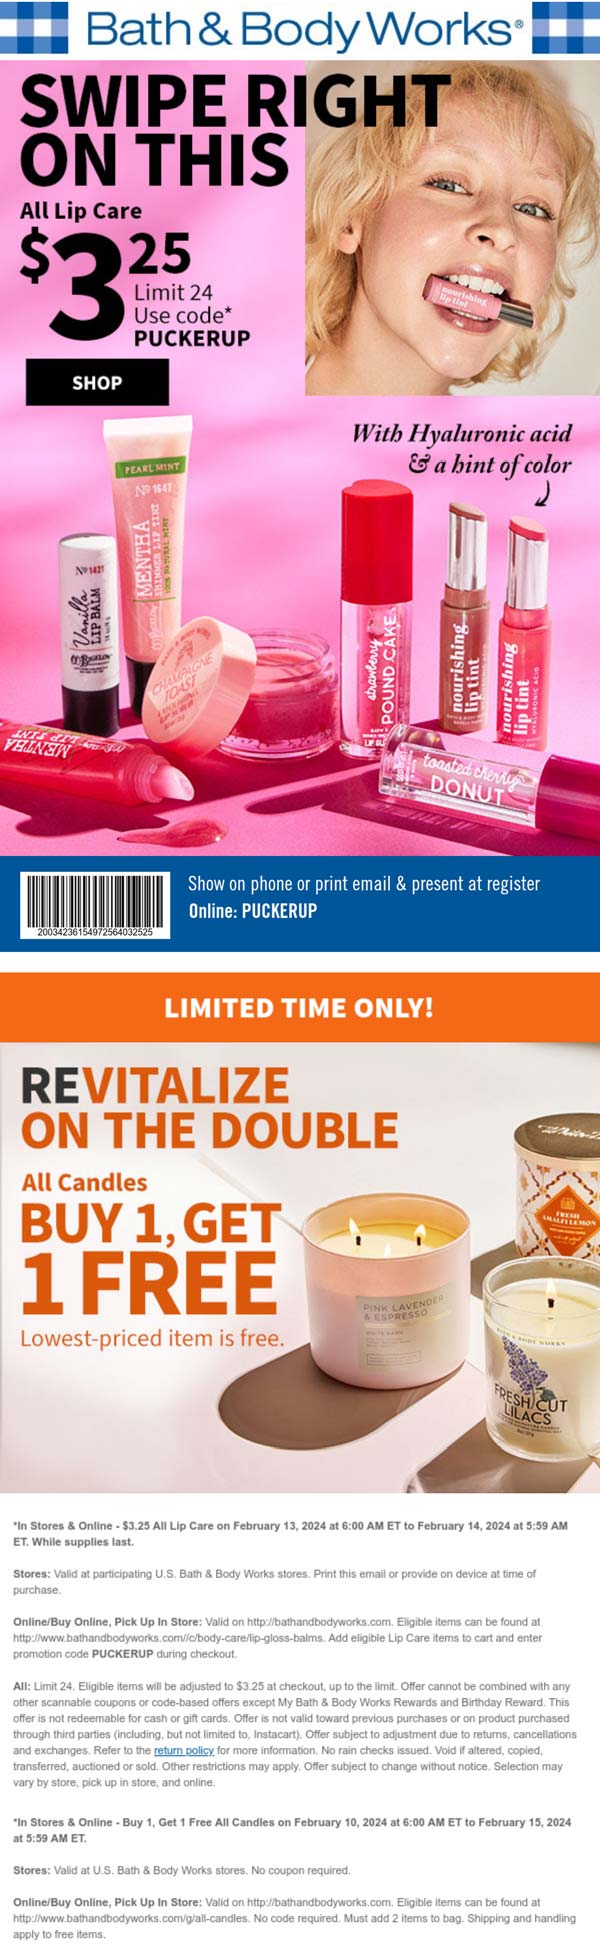 Bath & Body Works stores Coupon  All lip care $3.25 & second candle free today at Bath & Body Works, or online via promo code PUCKERUP #bathbodyworks 